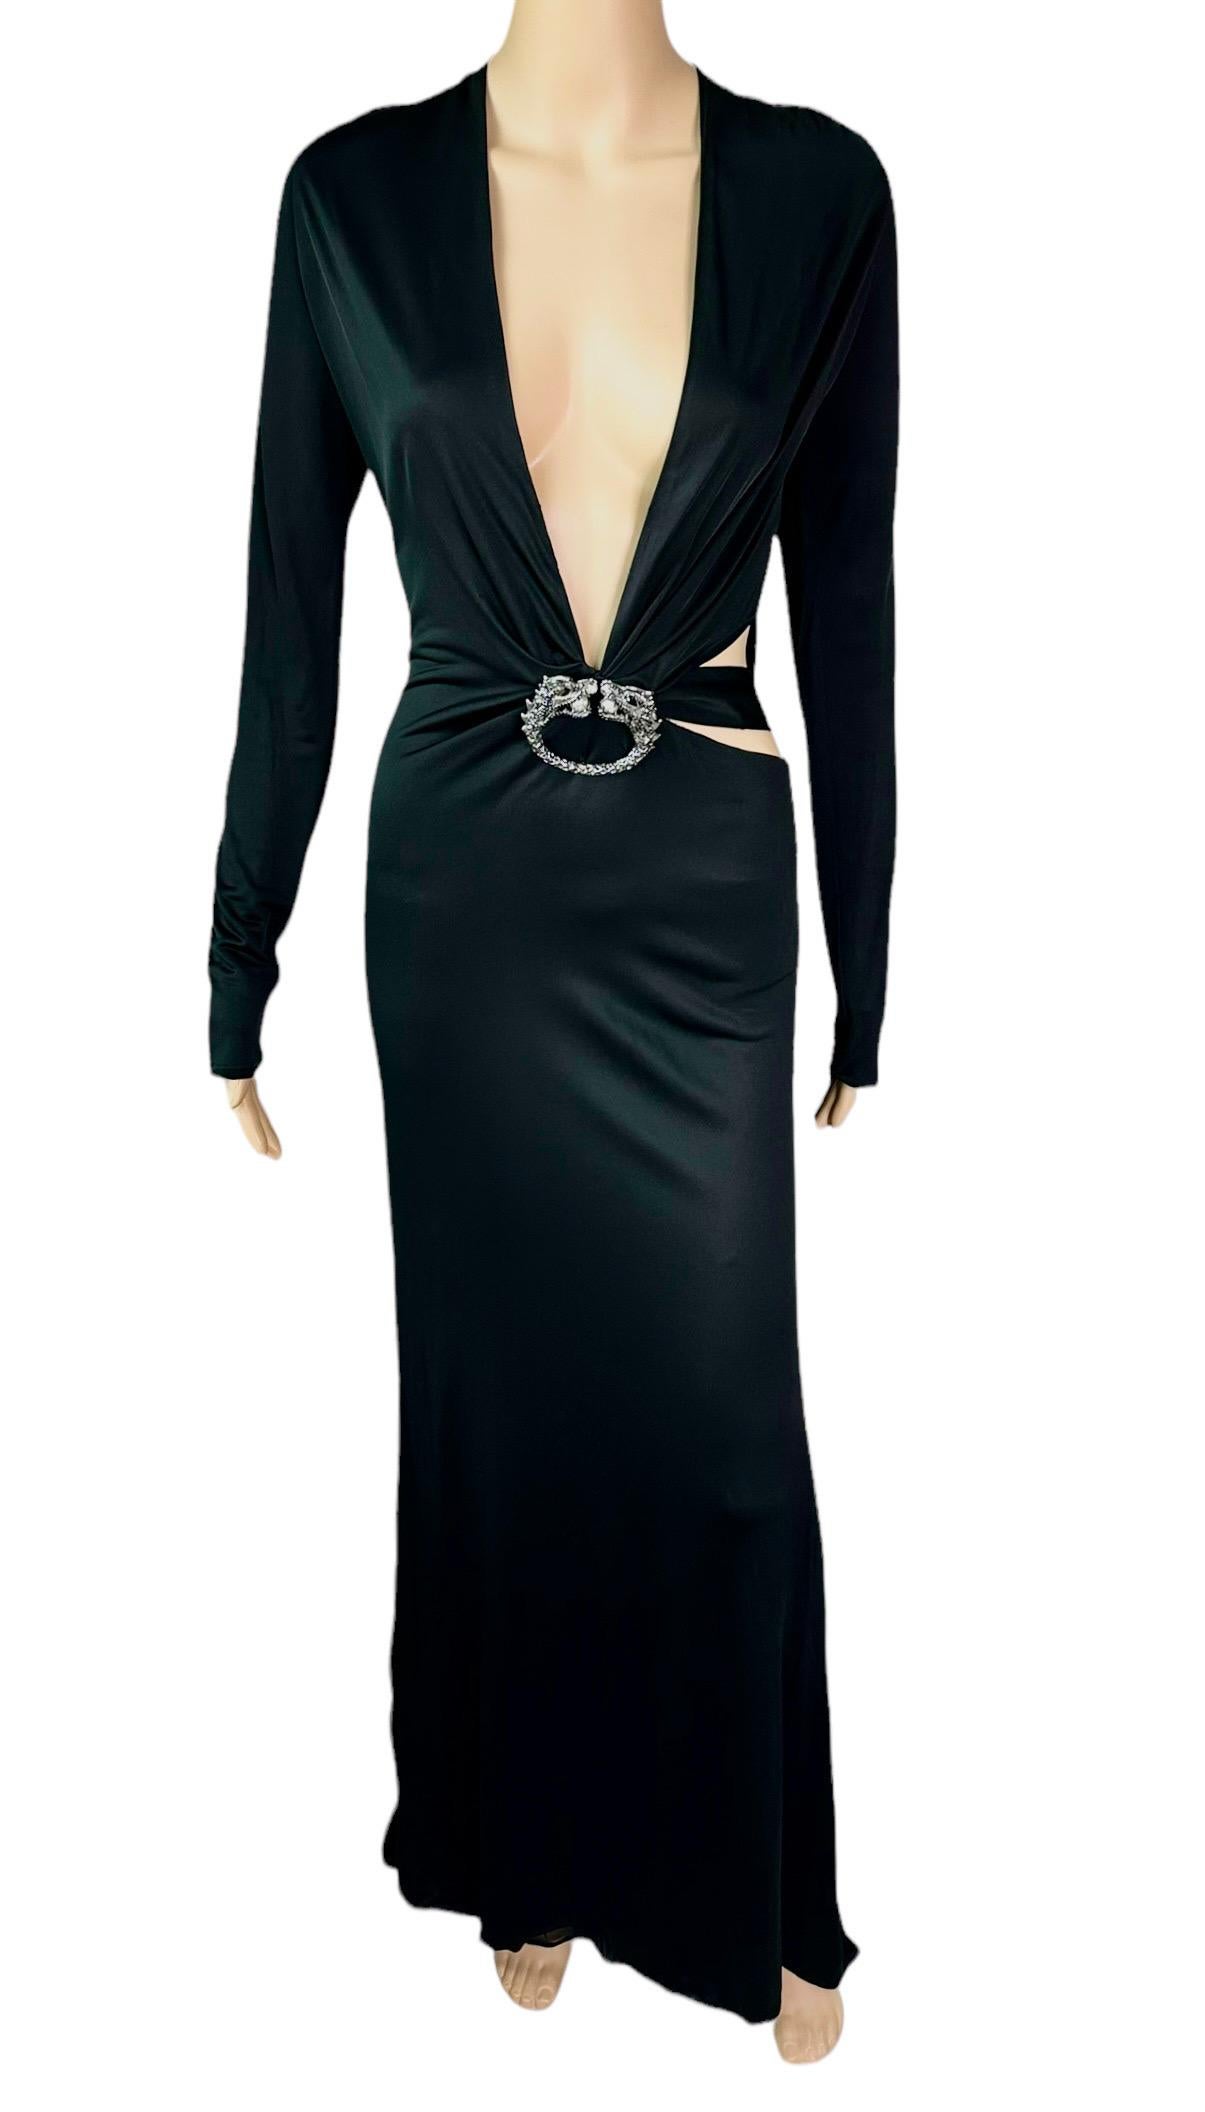 Women's Tom Ford for Gucci F/W 2004 Embellished Plunging Cutout Black Evening Dress Gown For Sale